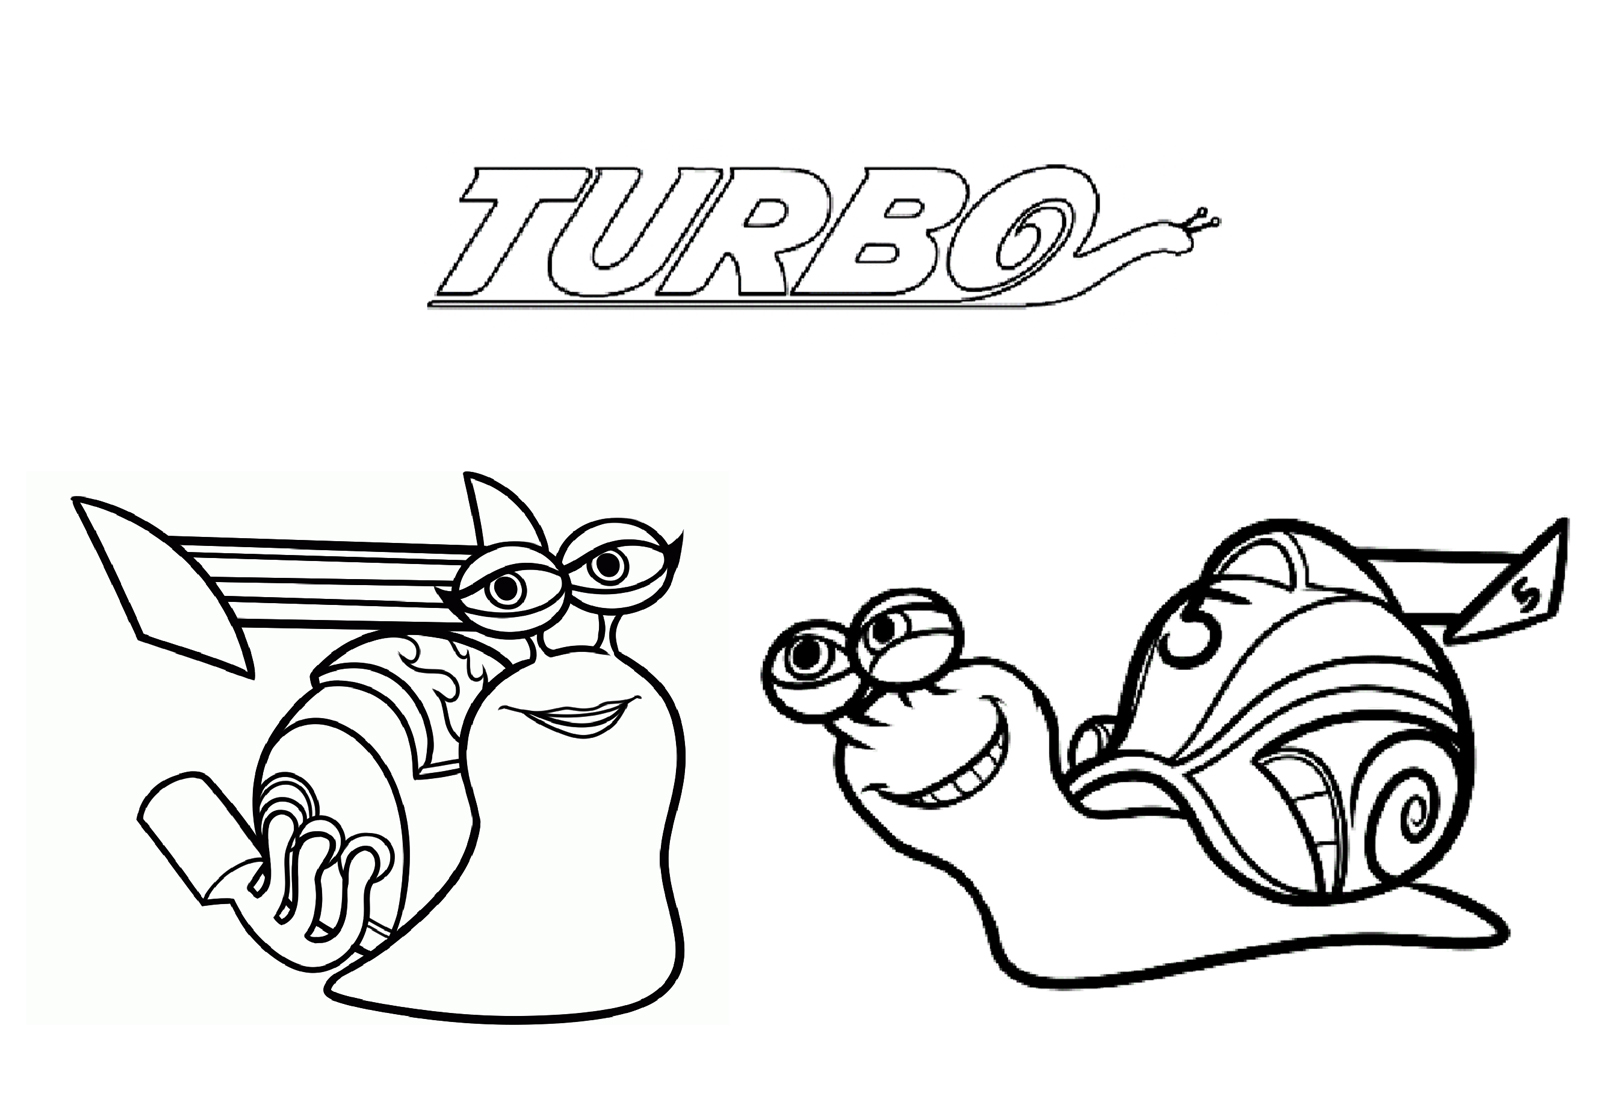 Free Turbo image with 2 snails and the logo